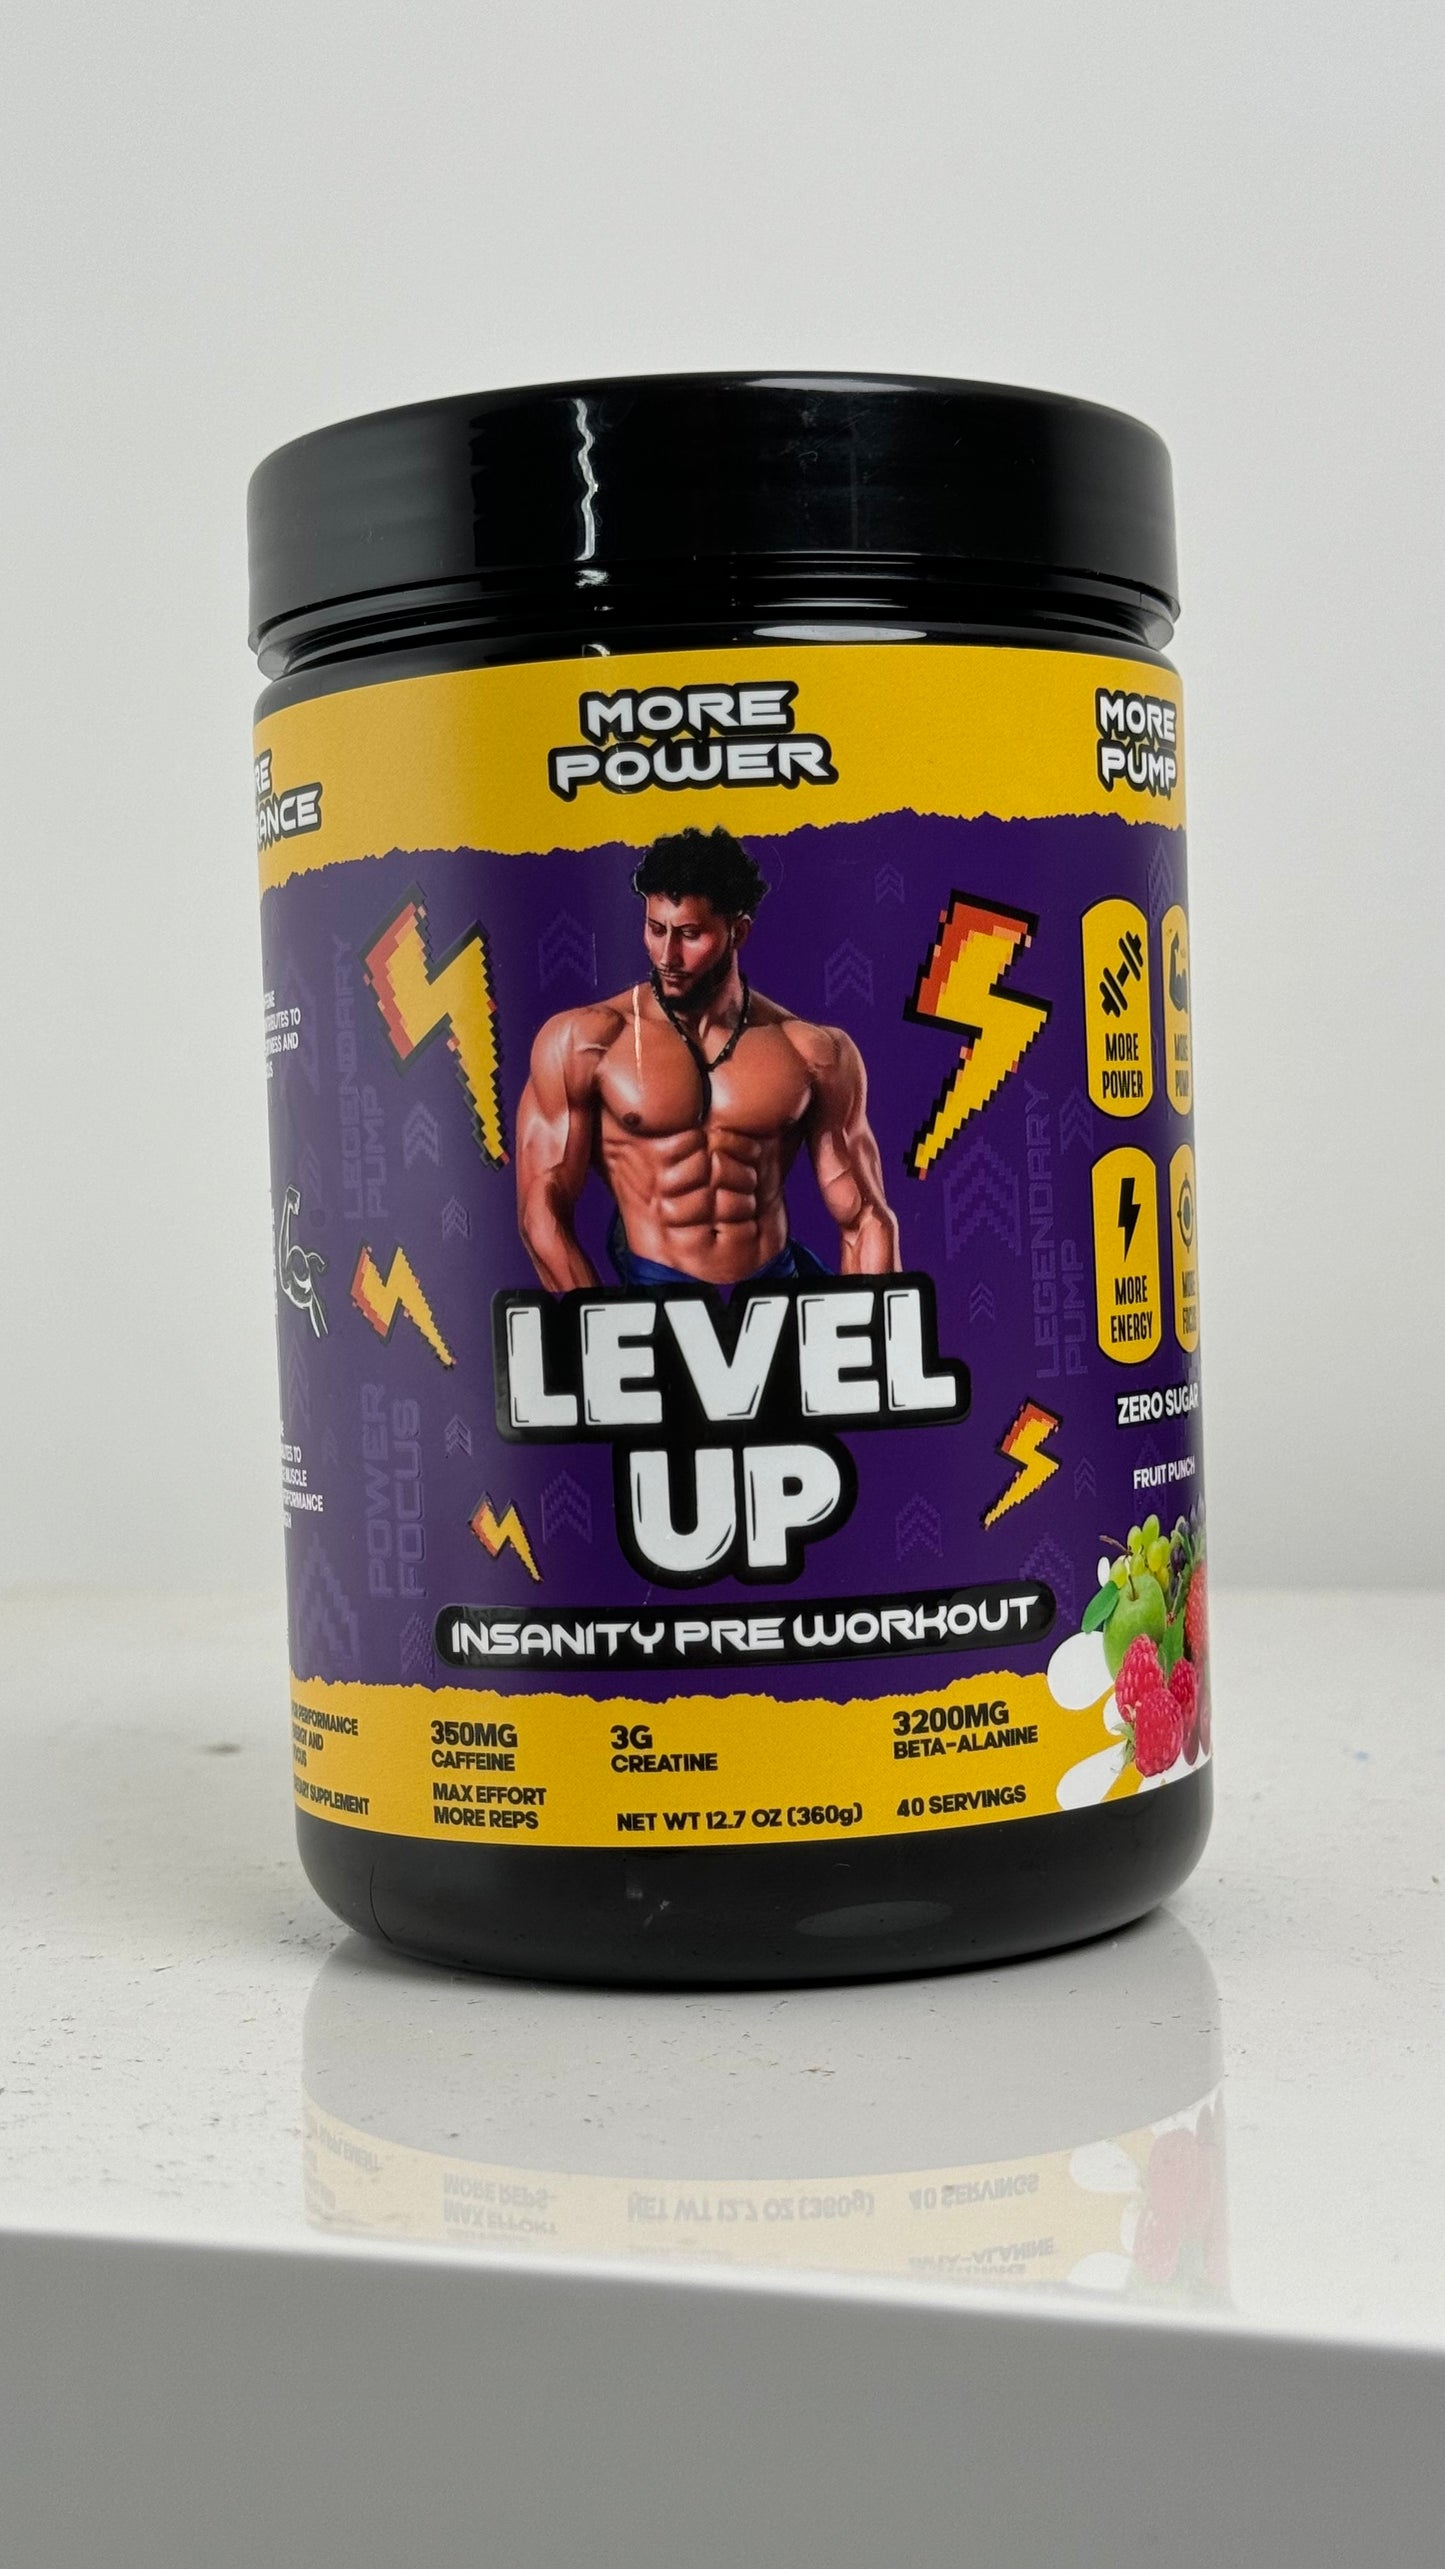 LEVEL UP - INSANITY ( PRE WORKOUT) Legendary Pump